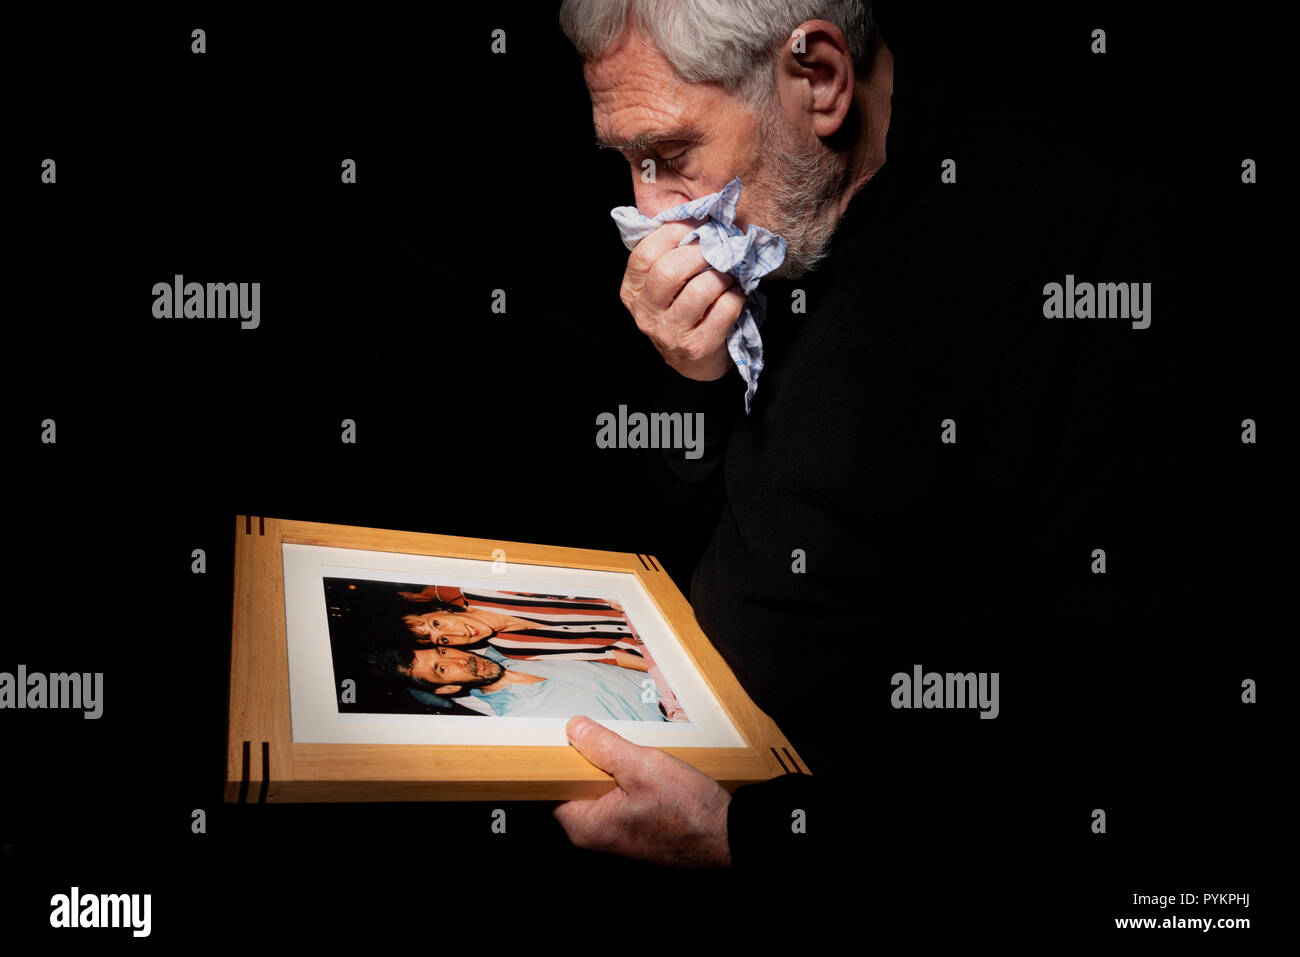 Senior grieving man. Remembering a departed loved one. Male experiencing loss and loneliness. Stock Photo